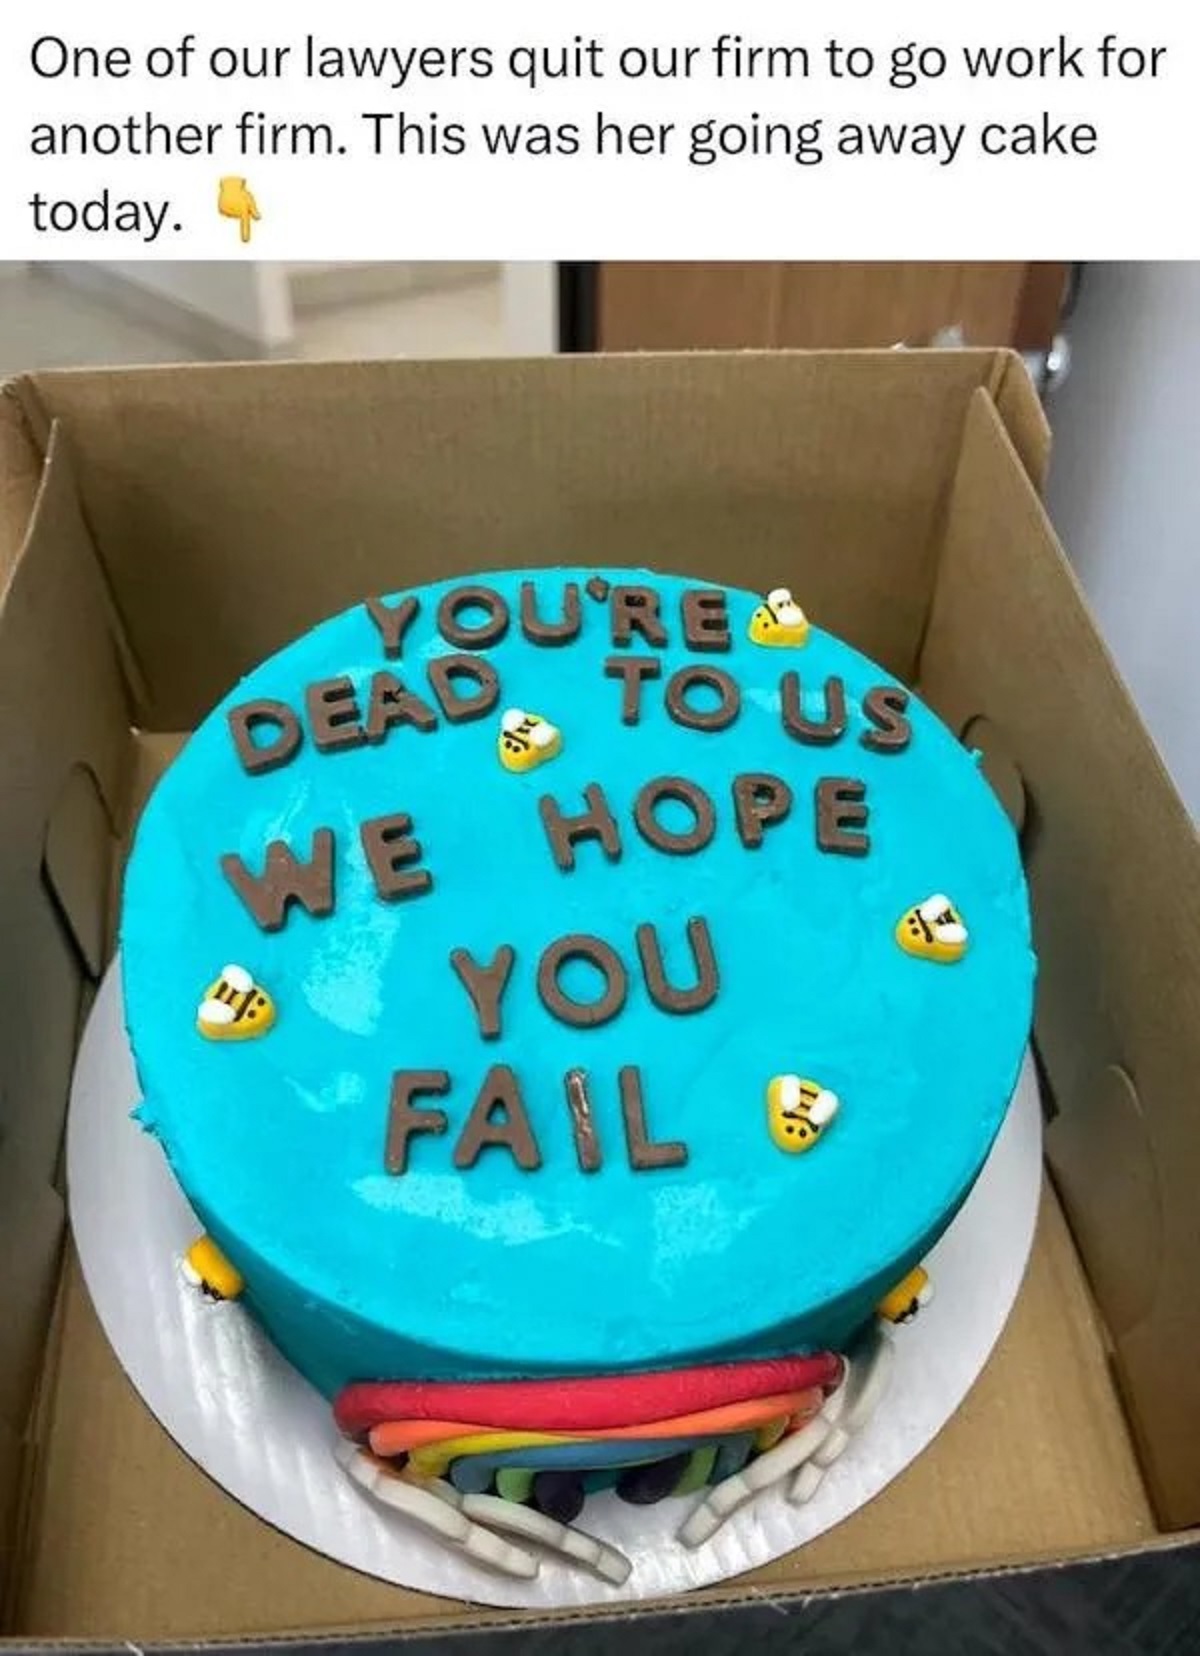 birthday cake - One of our lawyers quit our firm to go work for another firm. This was her going away cake today. You'Re Dead To Us We Hope You E 1 Fail 8